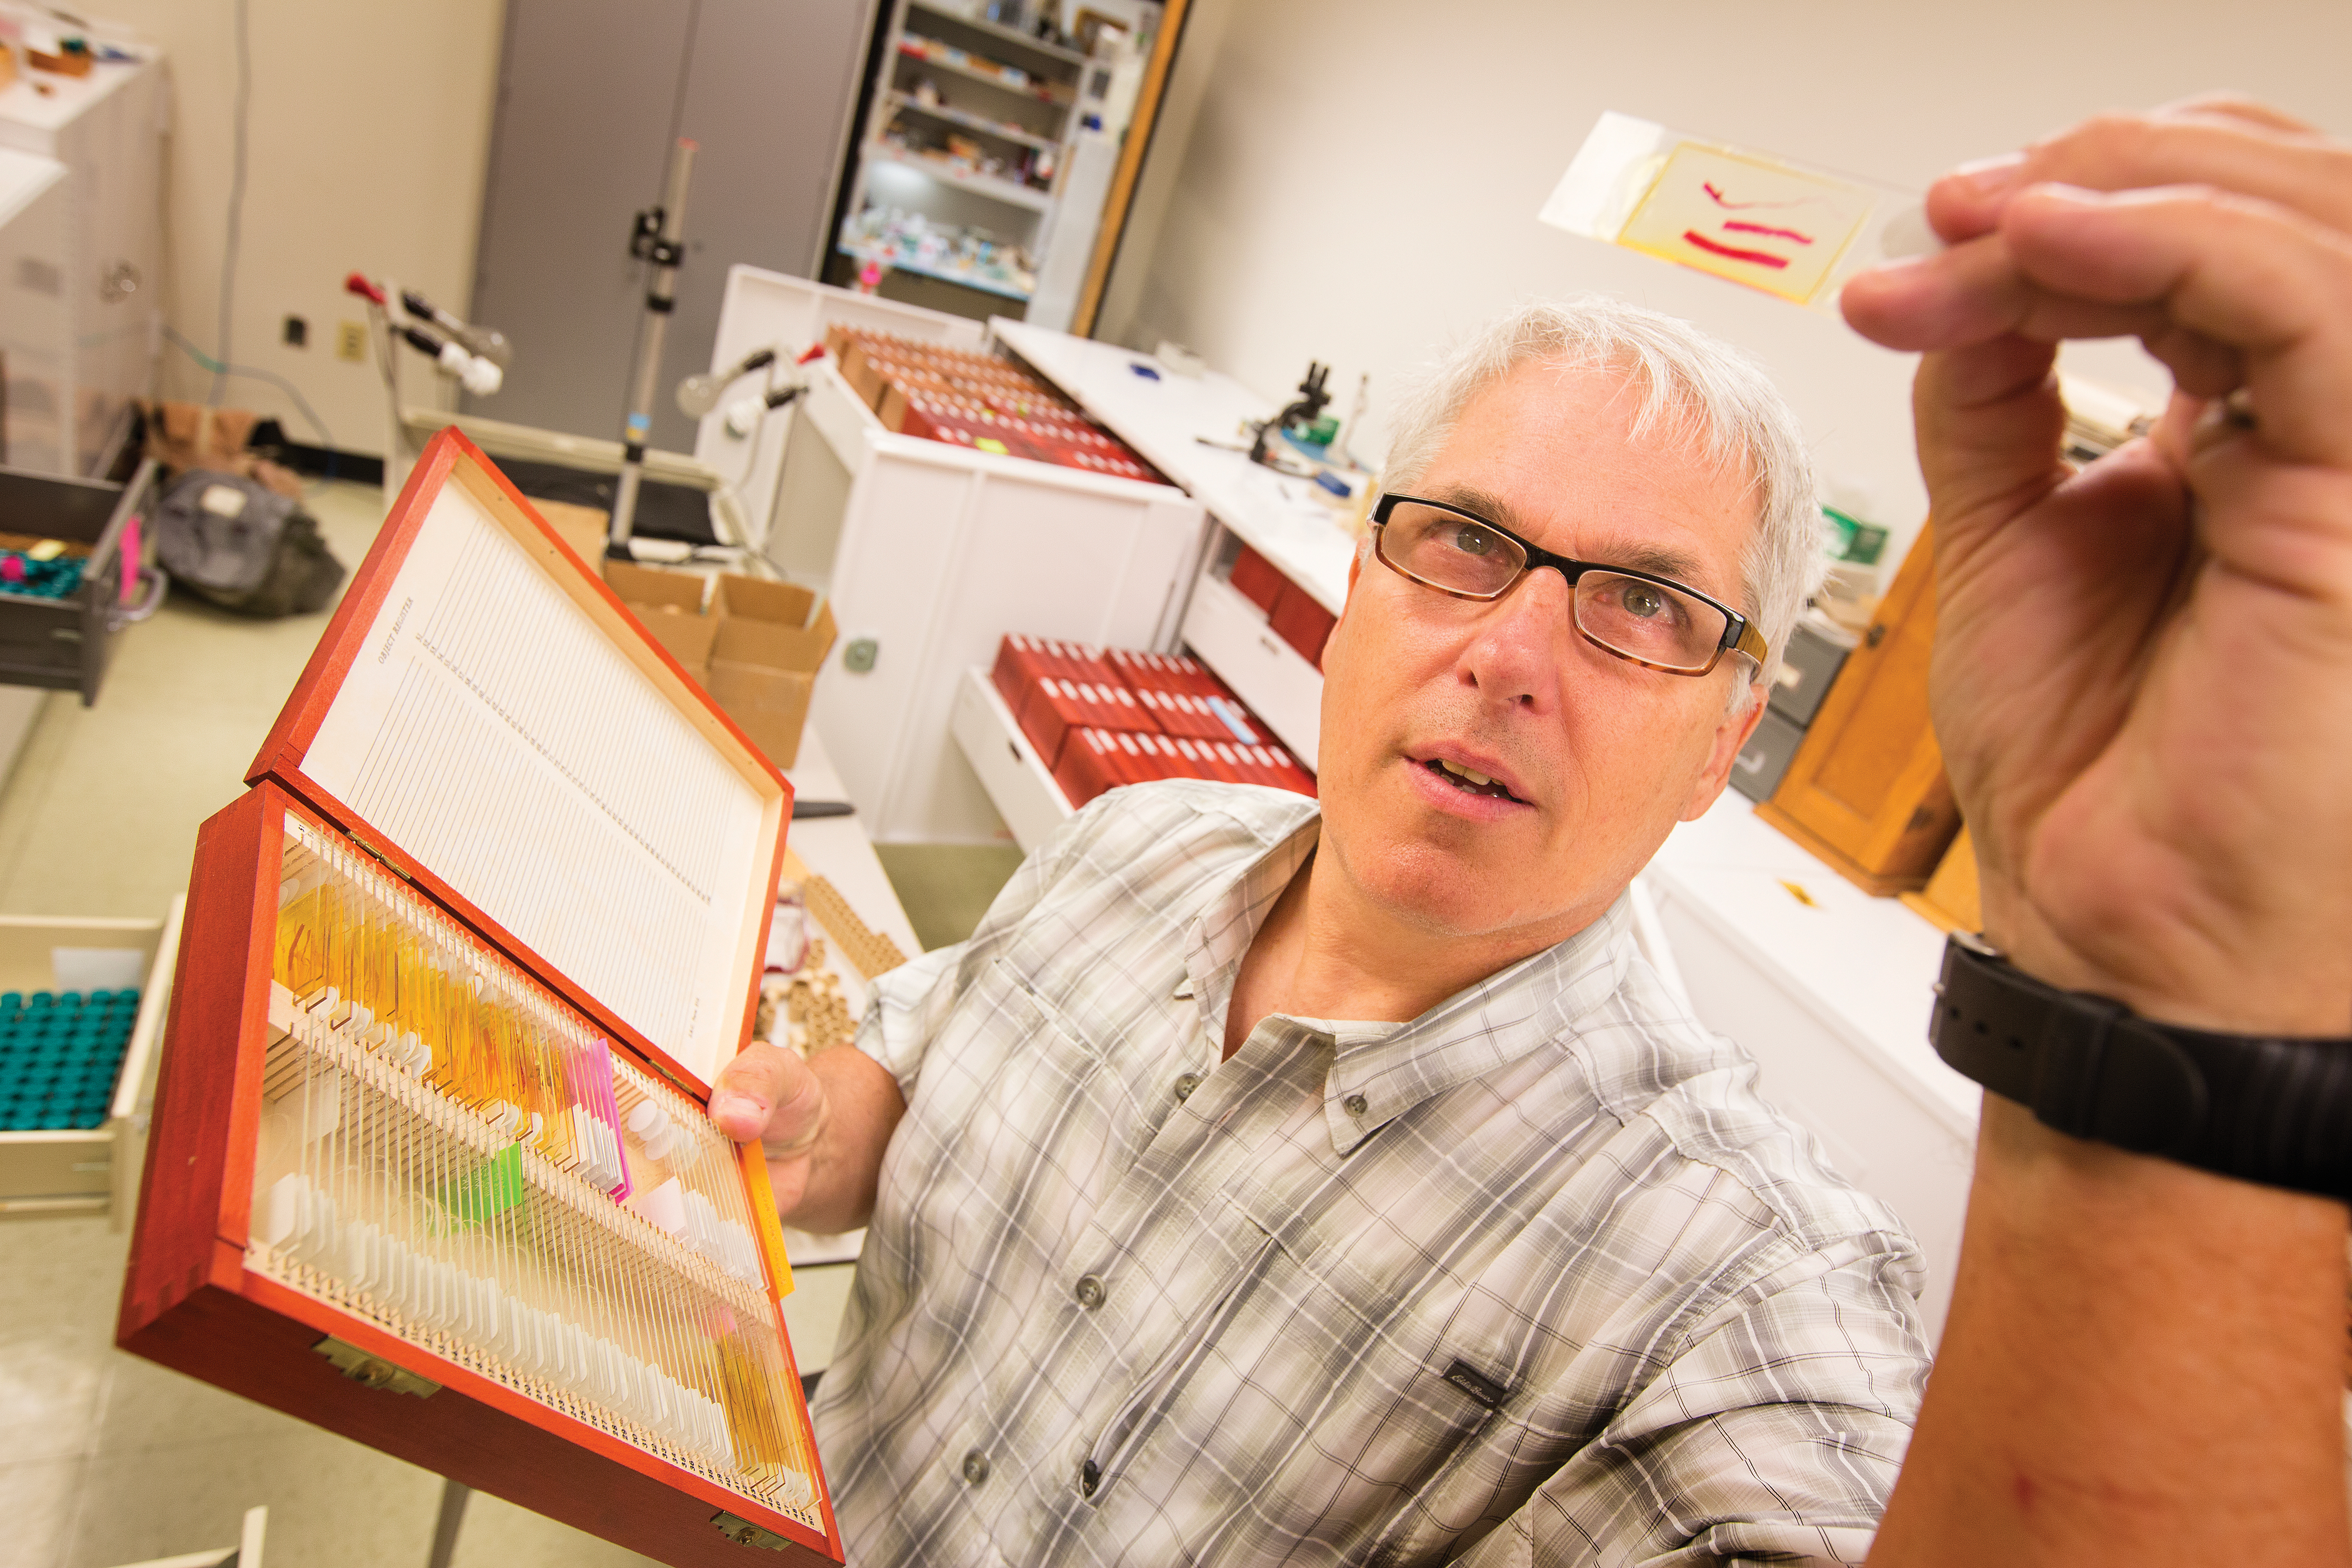 University of Nebraska State Museum curator and parasitologist Scott Gardner holds a specimen slide in the museum's Harold W. Manter Laboratory of Parasitology. Scientific research from the lab and research specimens are featured in the new exhibition "Guts and Glory: A Parasite Story" at Morrill Hall.